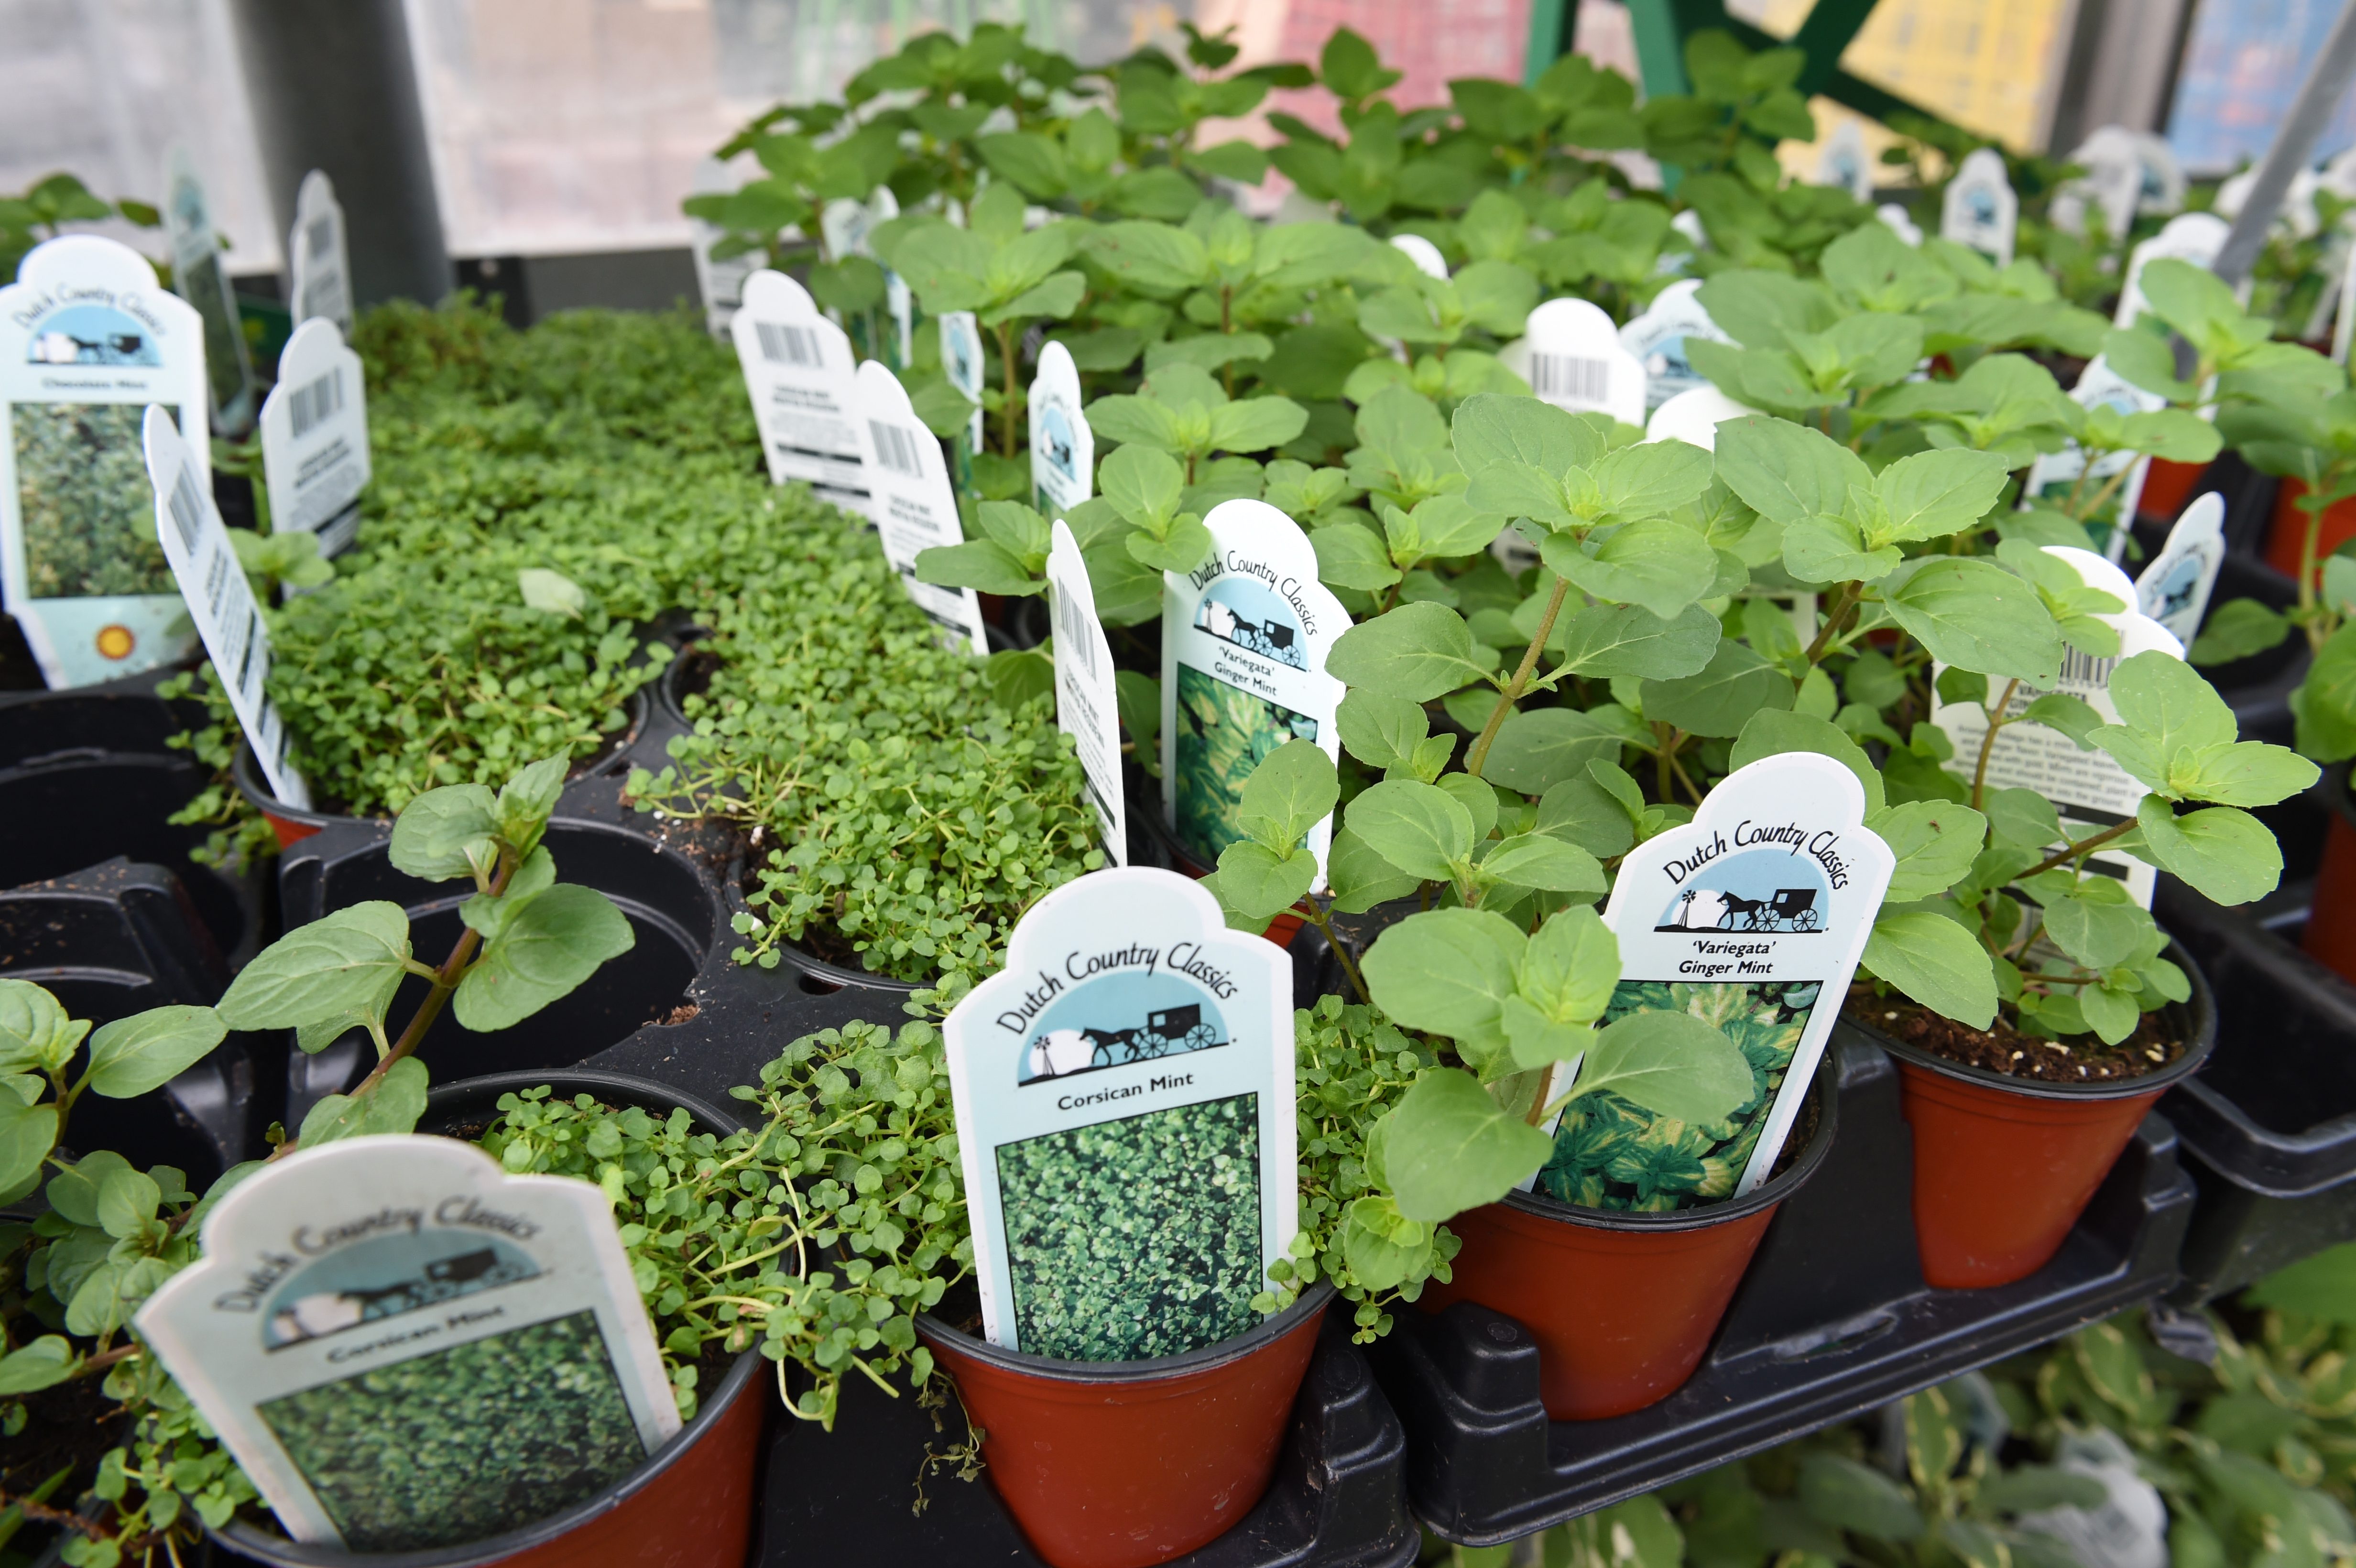 plant tags in Corsican and Ginger Mint - some of the varieties of herbs available at Esbenshade's Garden Center in Maidencreek Township on Friday, May 11, 2018. Photo by Harold Hoch